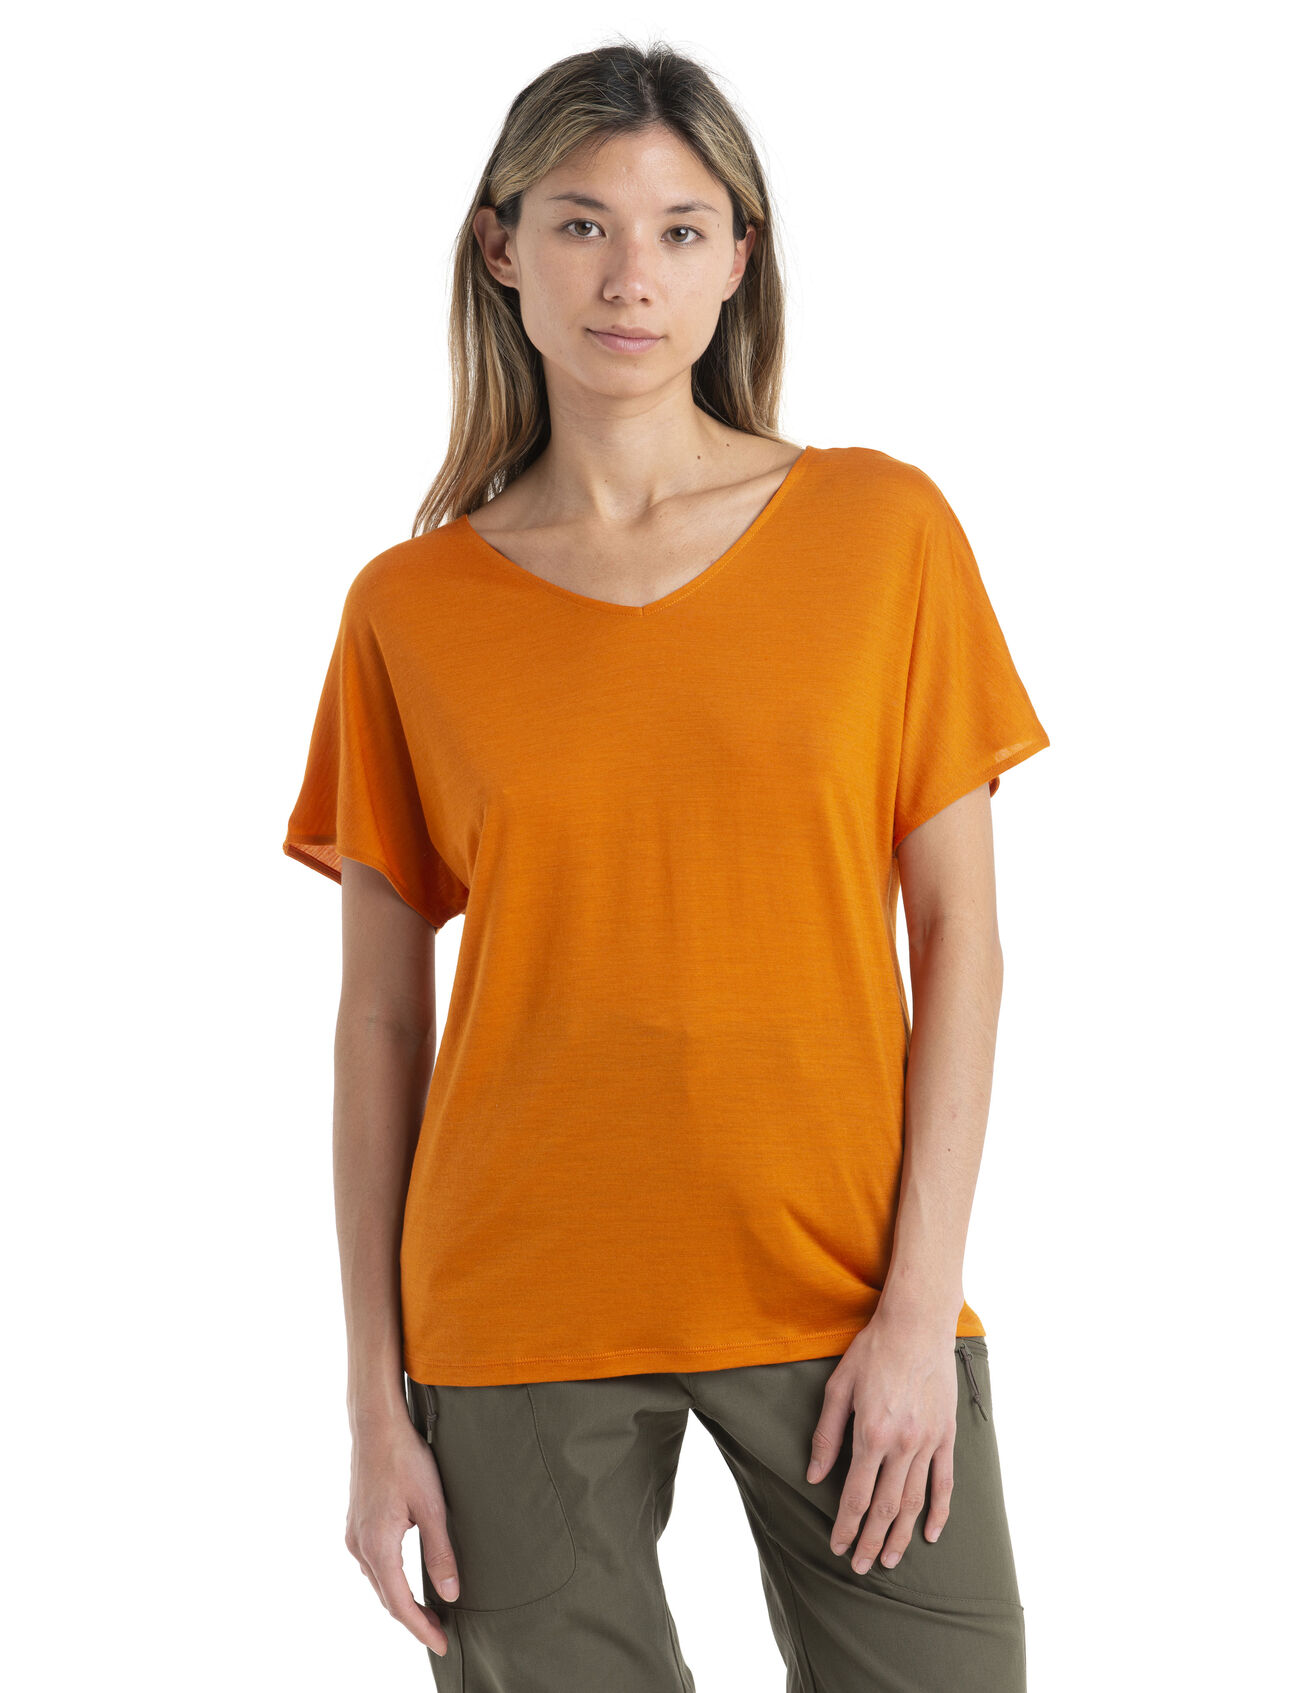 Womens Merino Blend Drayden Reversible Top A versatile everyday shirt featuring our Cool-Lite™ jersey fabric, the Drayden Reversible Short Sleeve Top can be worn frontwards for a soft V neck, or backwards for a high crew neck.